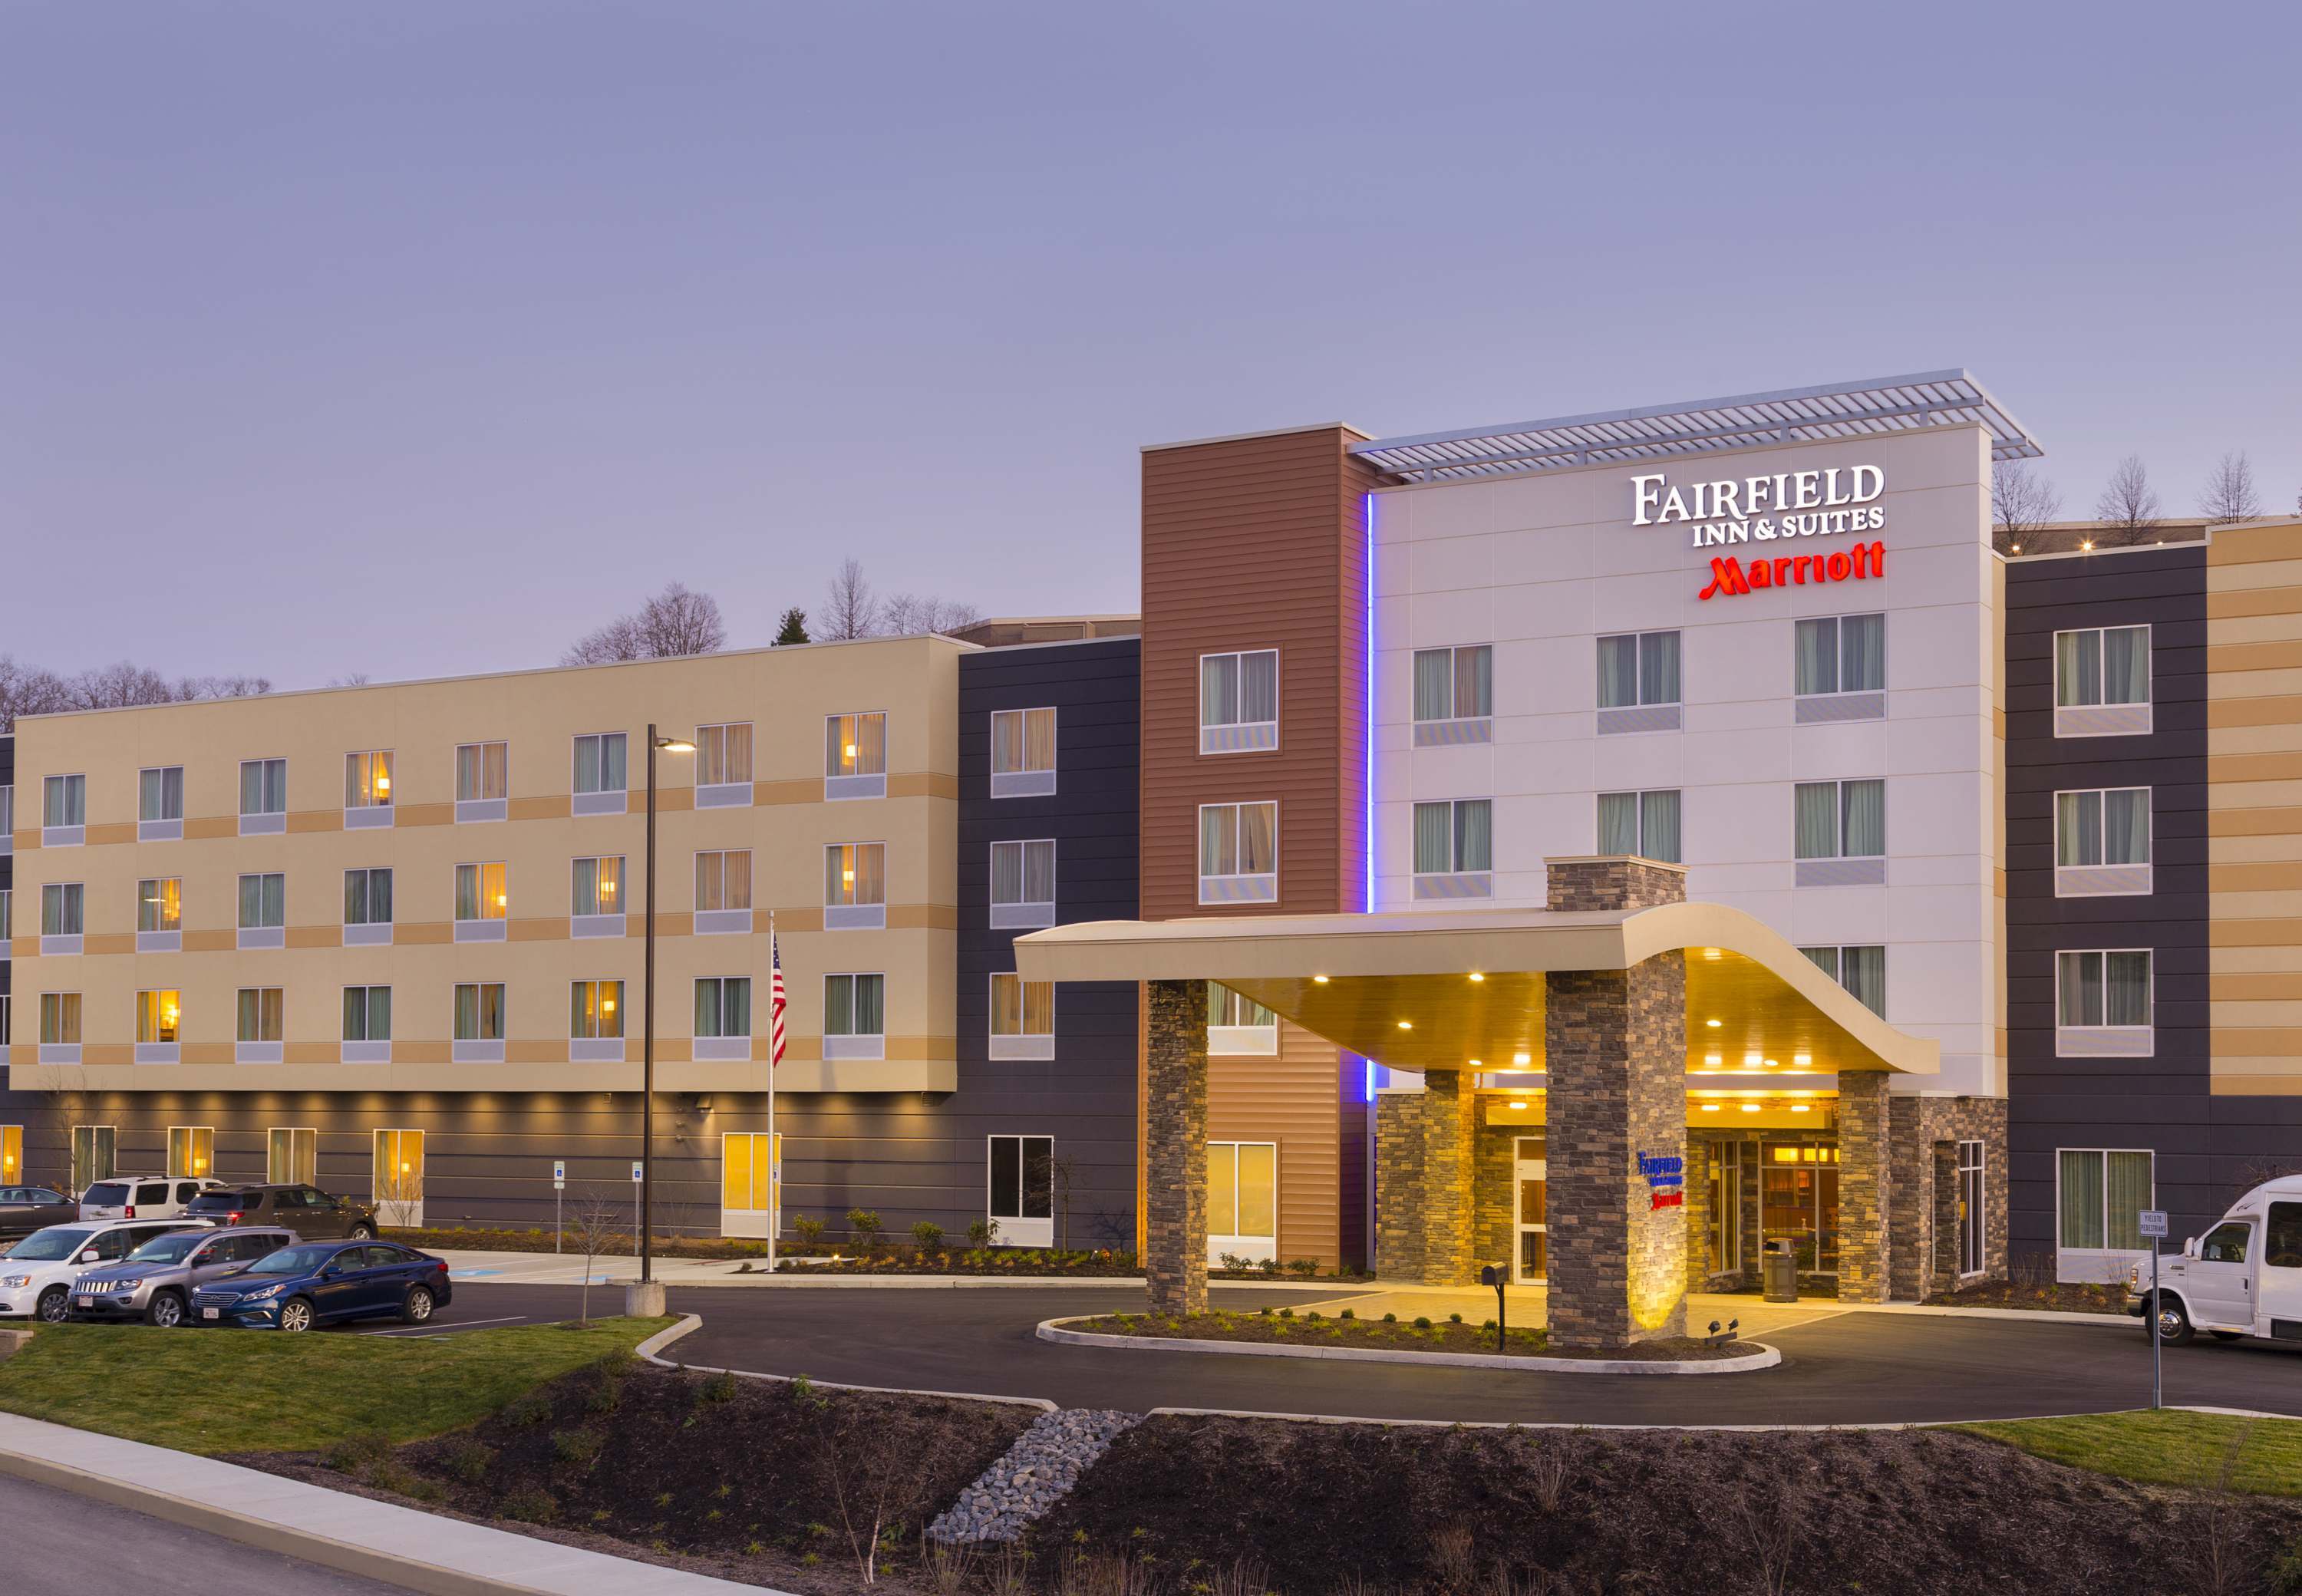 Photo of Fairfield Inn & Suites Pittsburgh Airport/Robinson Township, Pittsburgh, PA